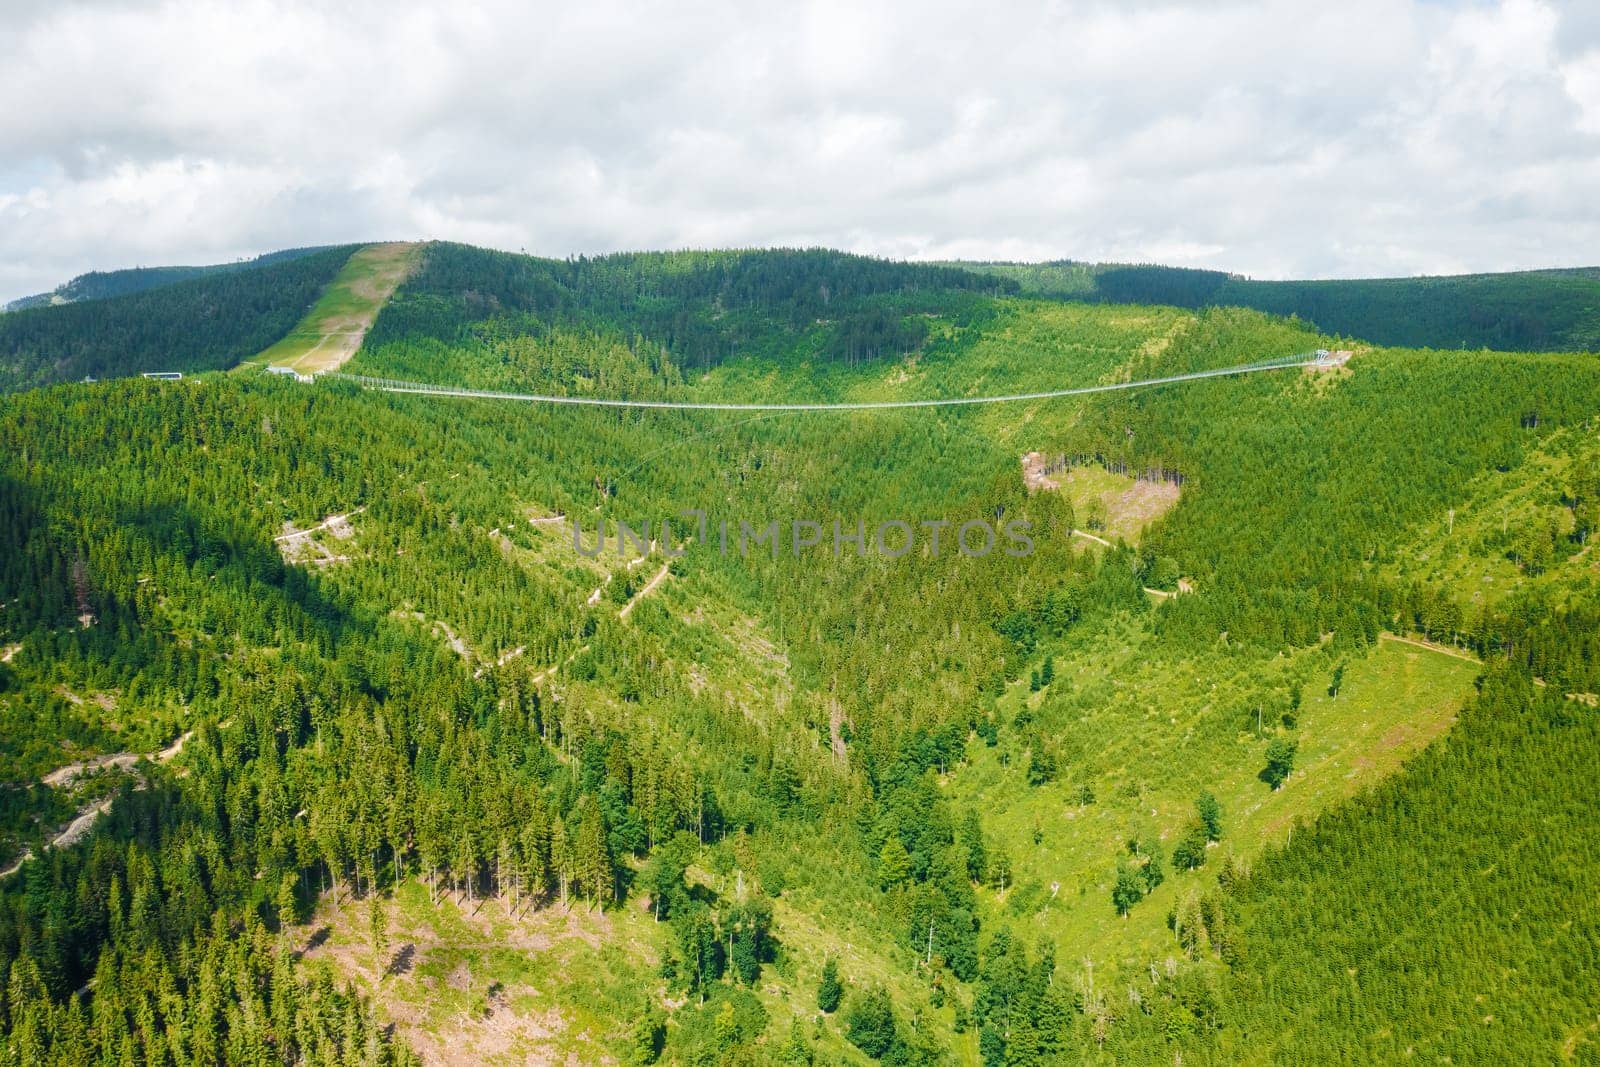 Aerial view of suspension Sky Bridge 721 and observation tower in mountains, Dolni Morava, Czech Republic.